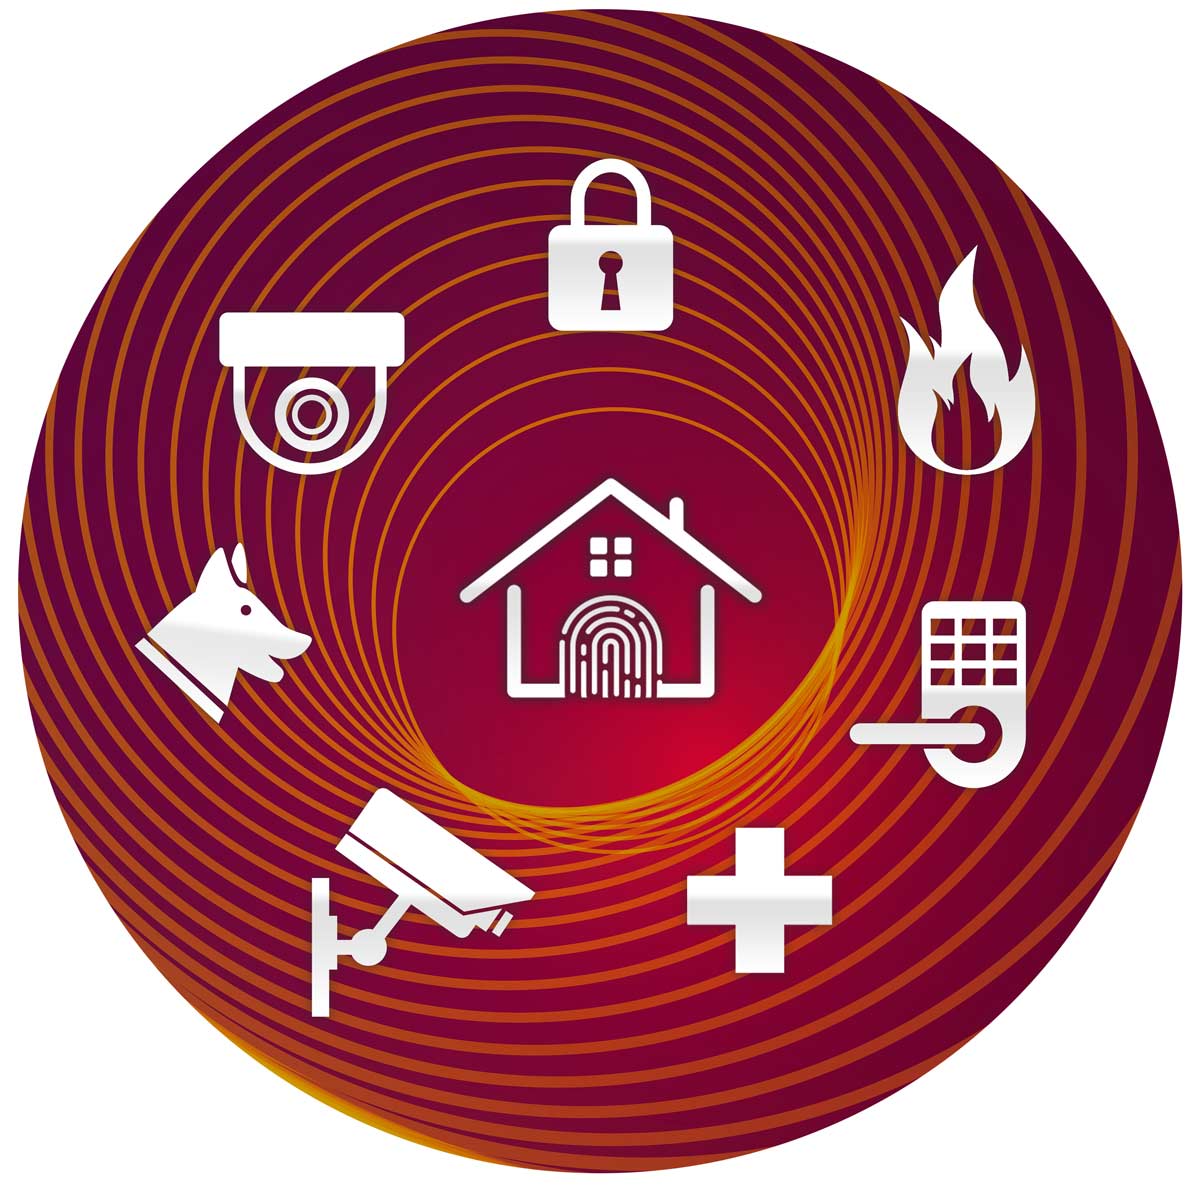 Different icons, including a padlock, fire, medicine, CCTV, Home, and a pet